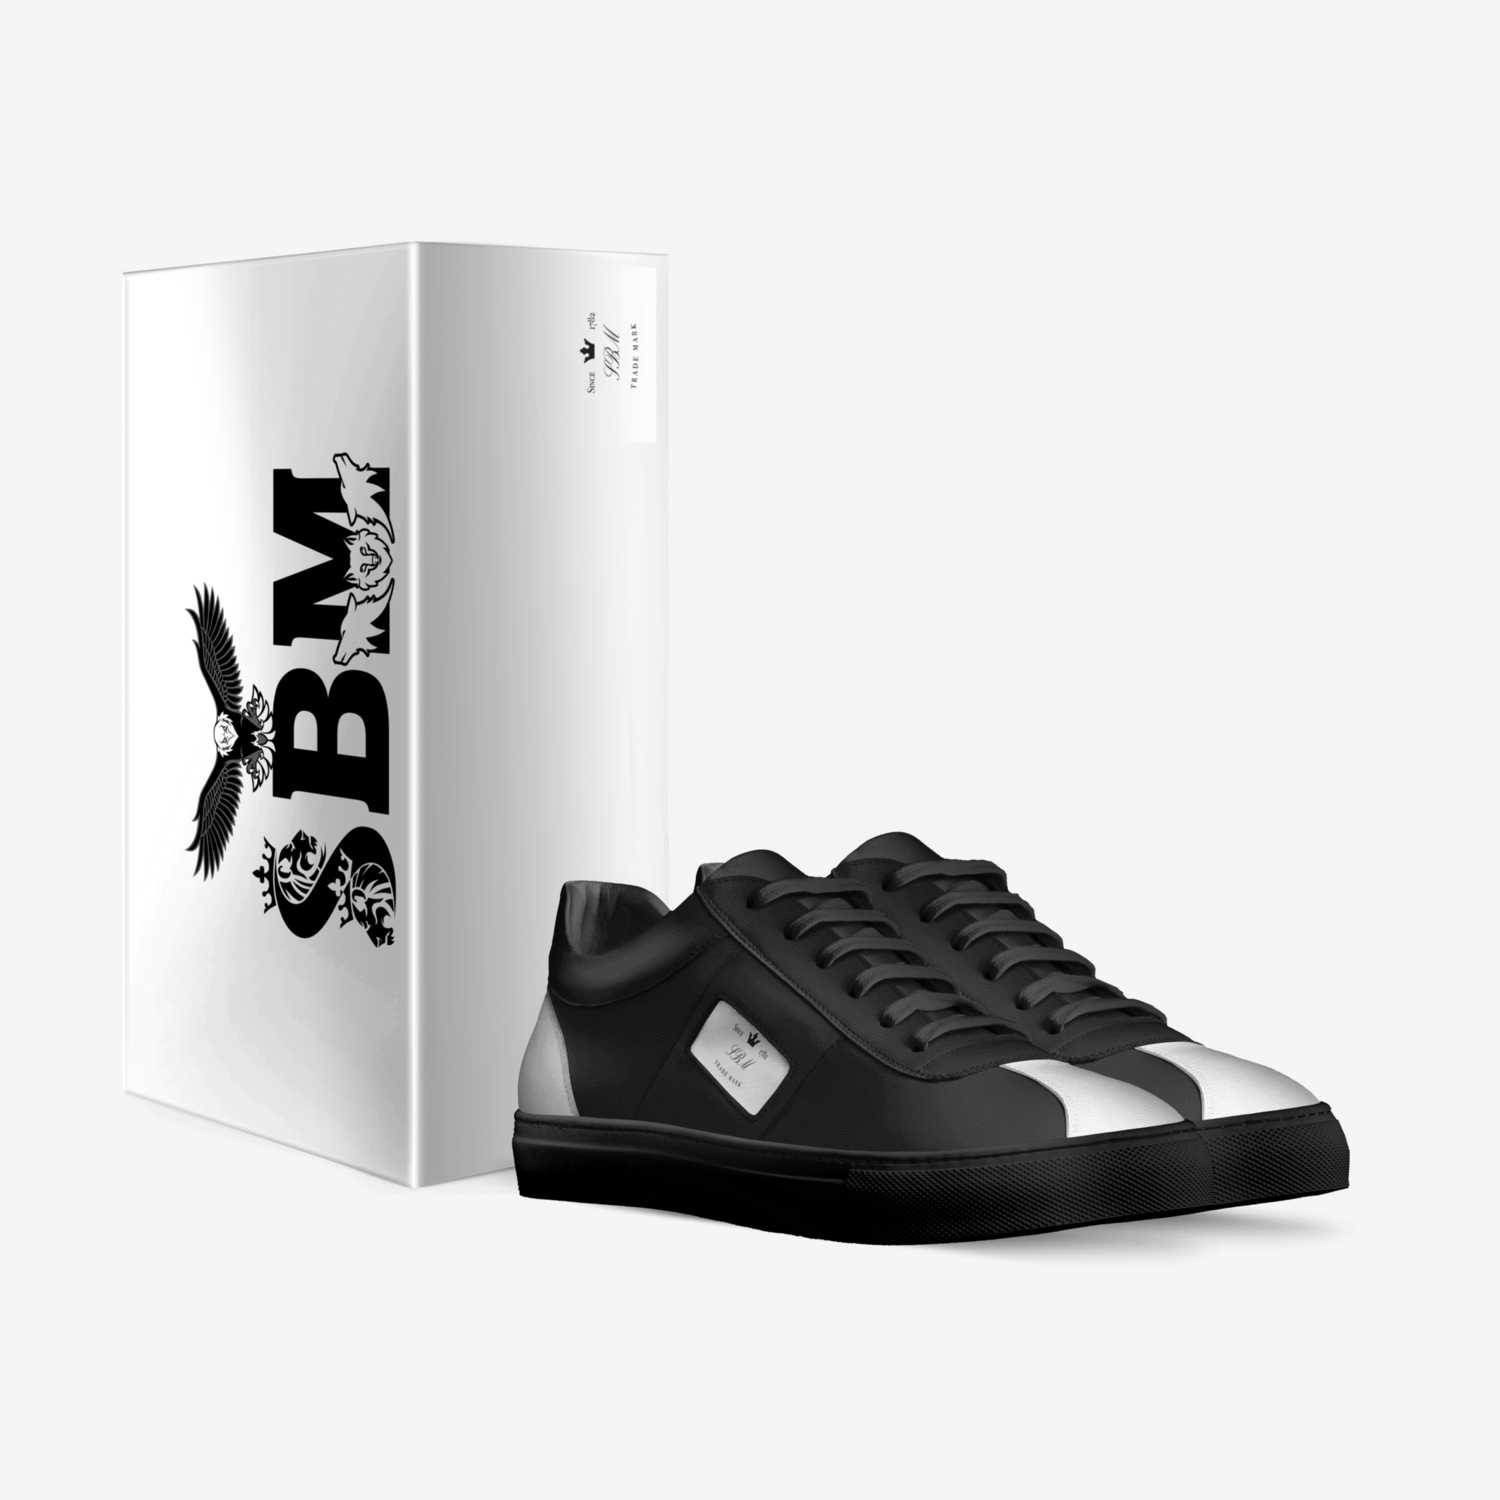 SBM custom made in Italy shoes by Roy Brooks | Box view